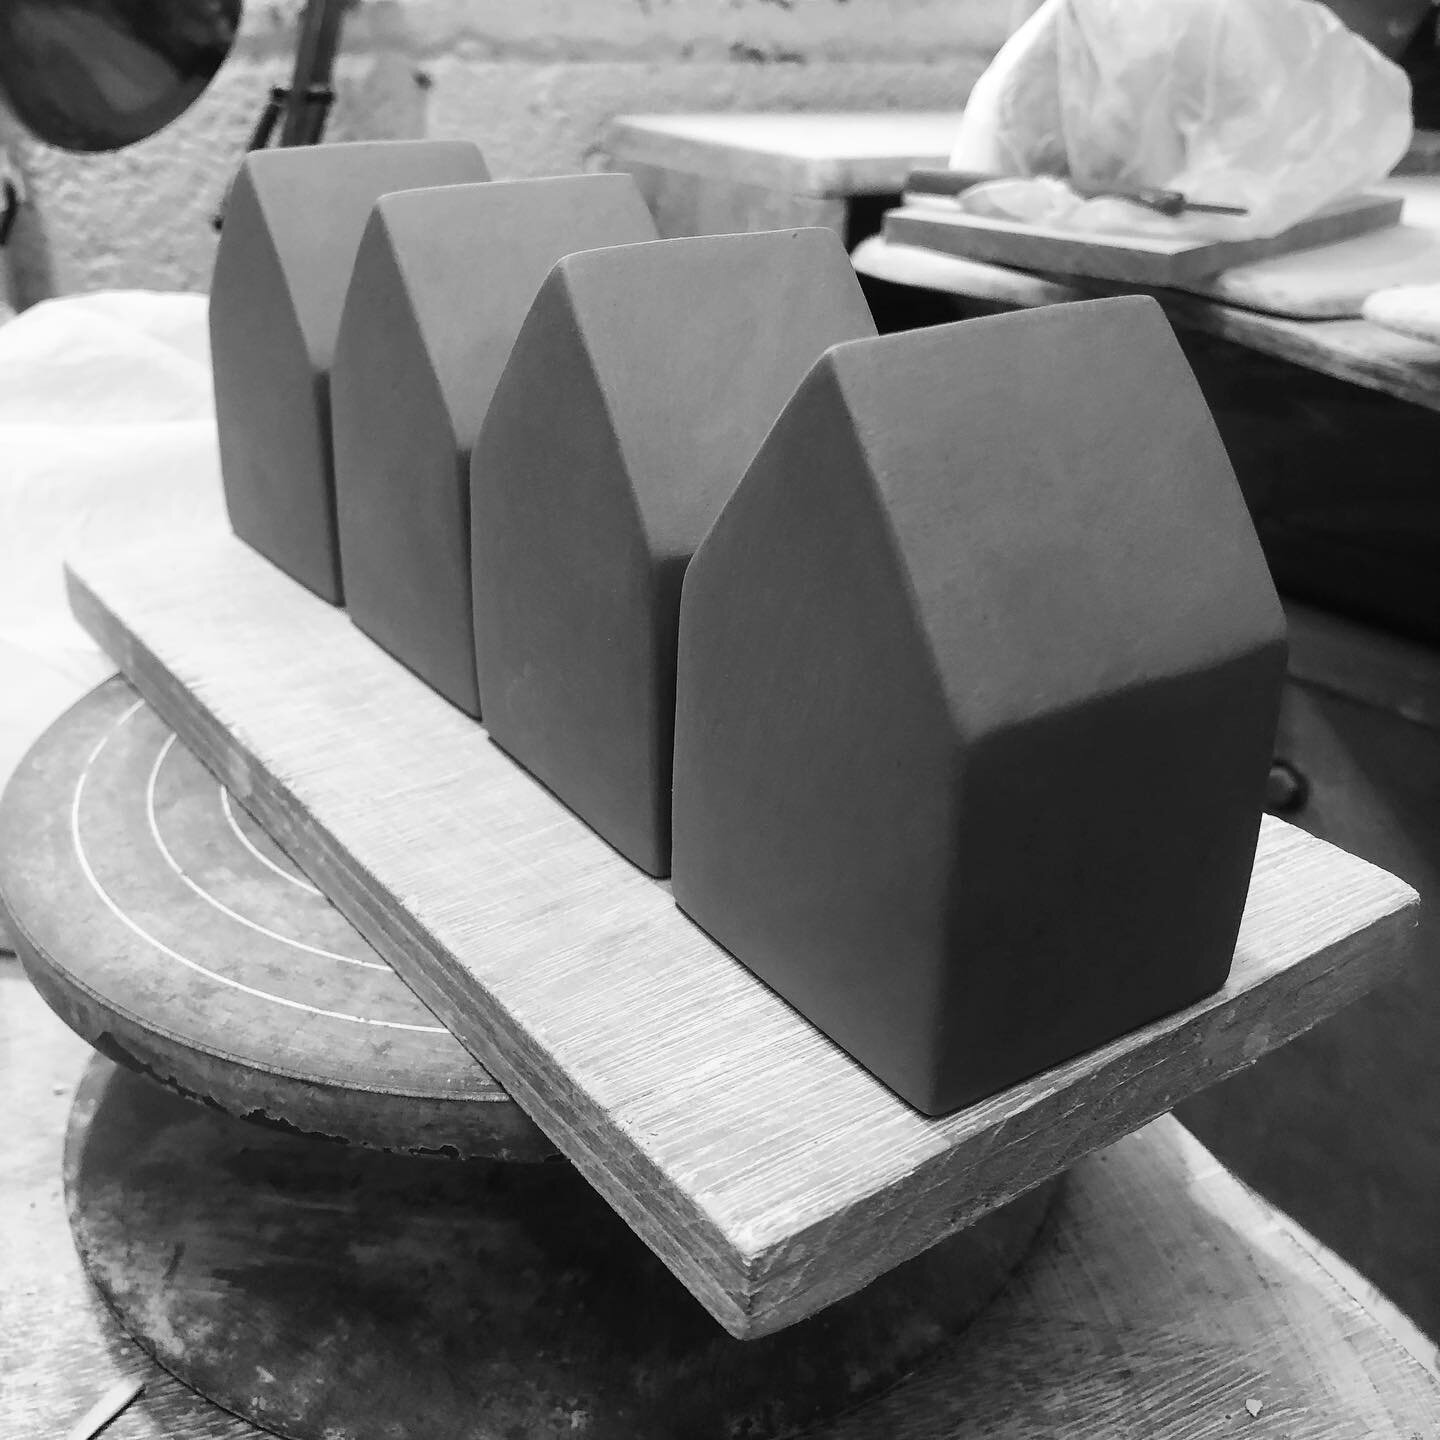 A row of  hollow houses on my workshop table today .